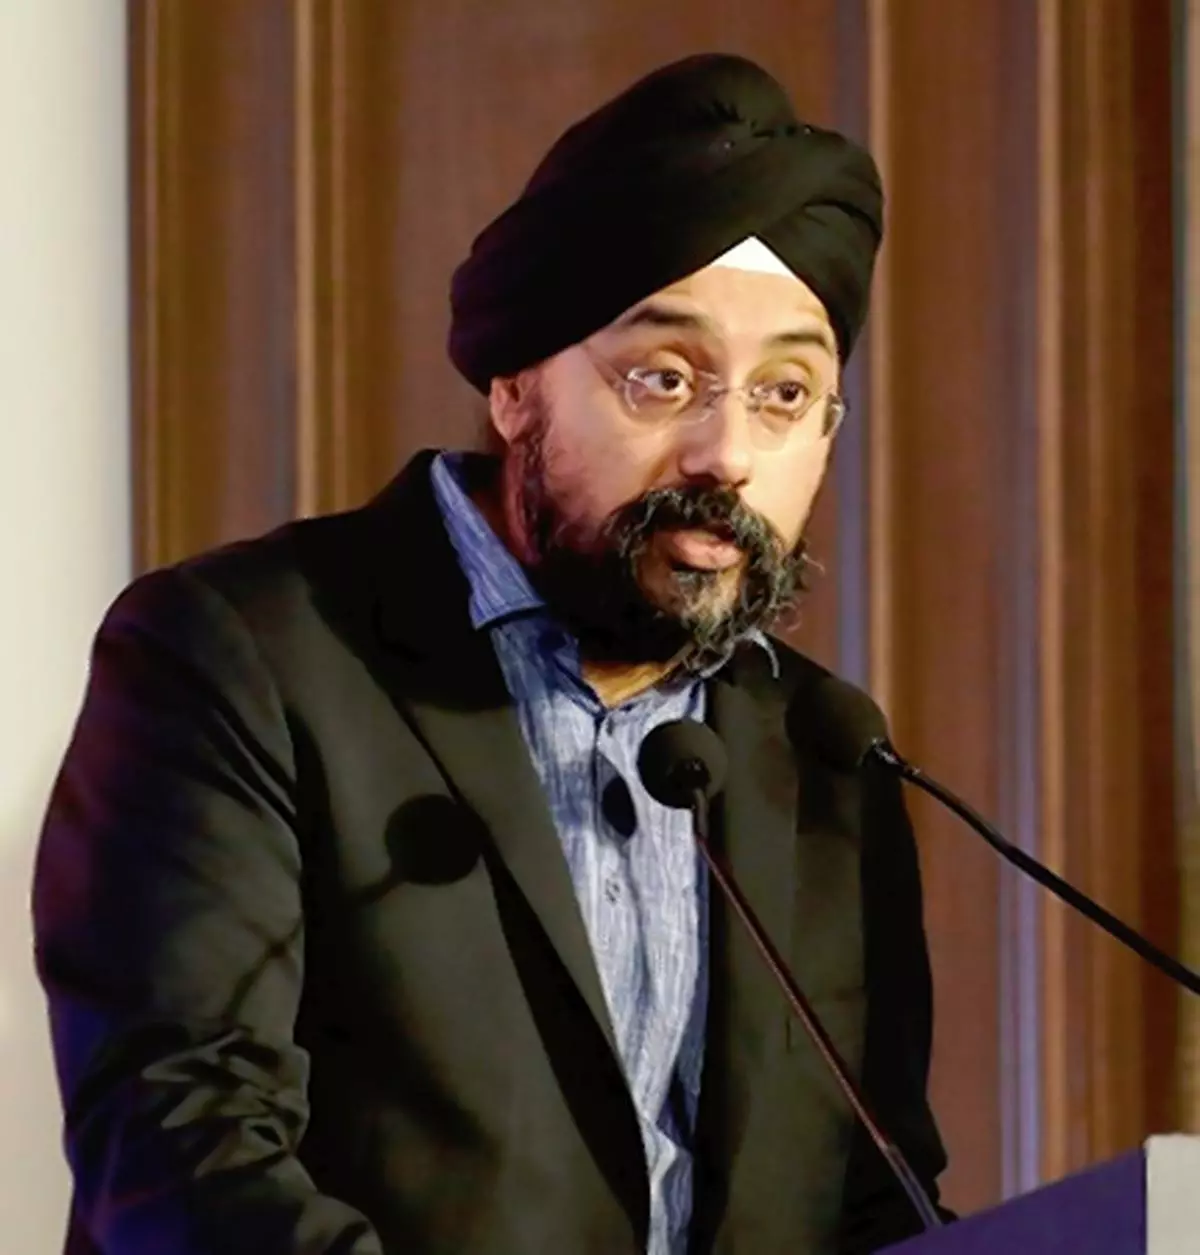 Prabhjeet Singh, President of Uber India and South Asia